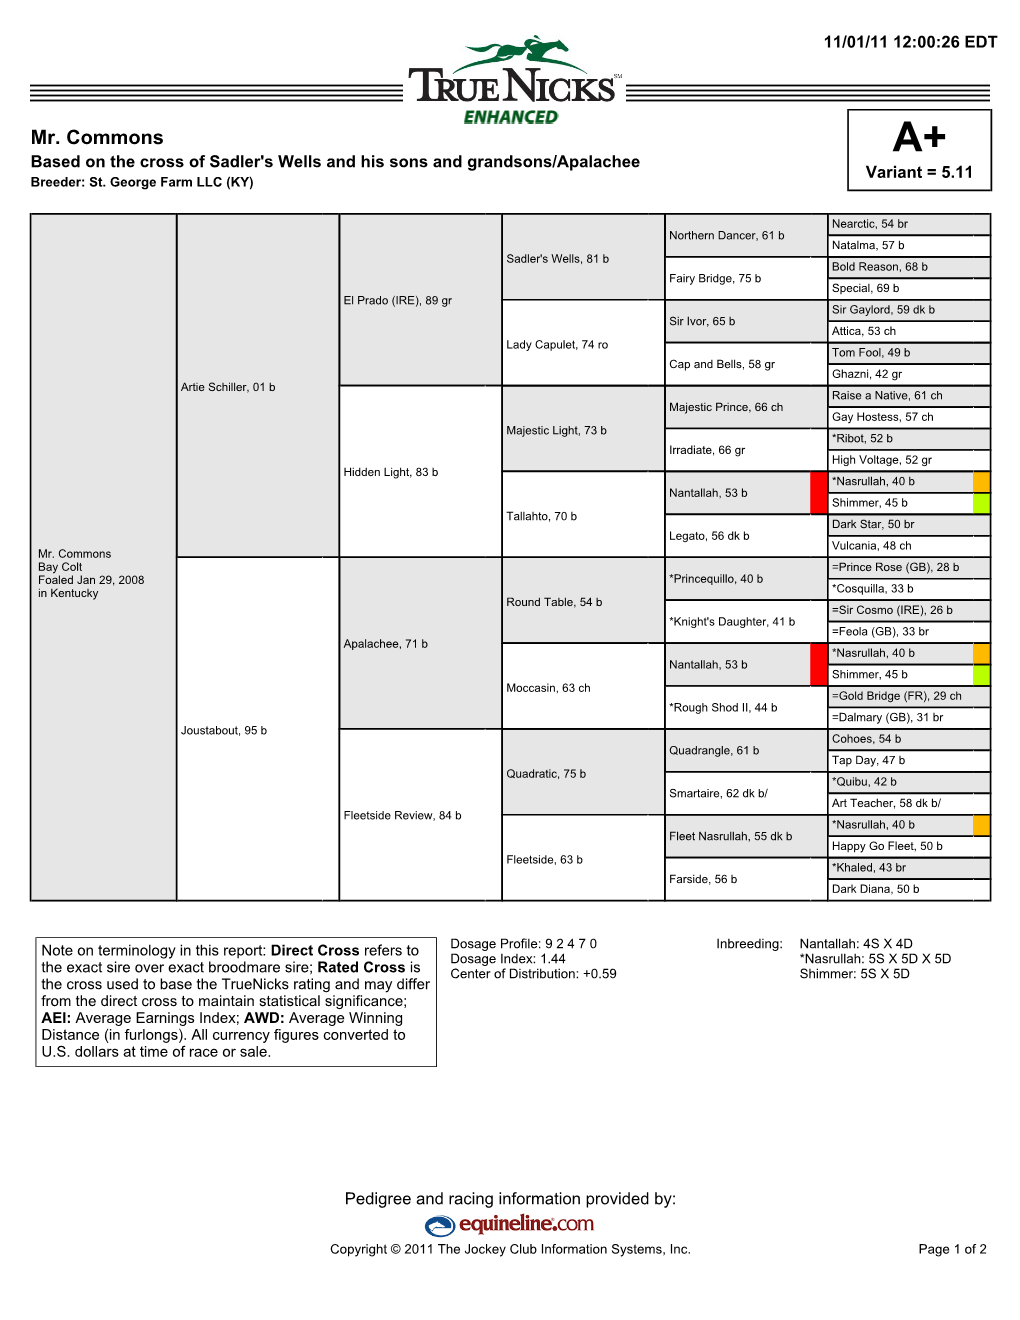 Mr. Commons A+ Based on the Cross of Sadler's Wells and His Sons and Grandsons/Apalachee Variant = 5.11 Breeder: St